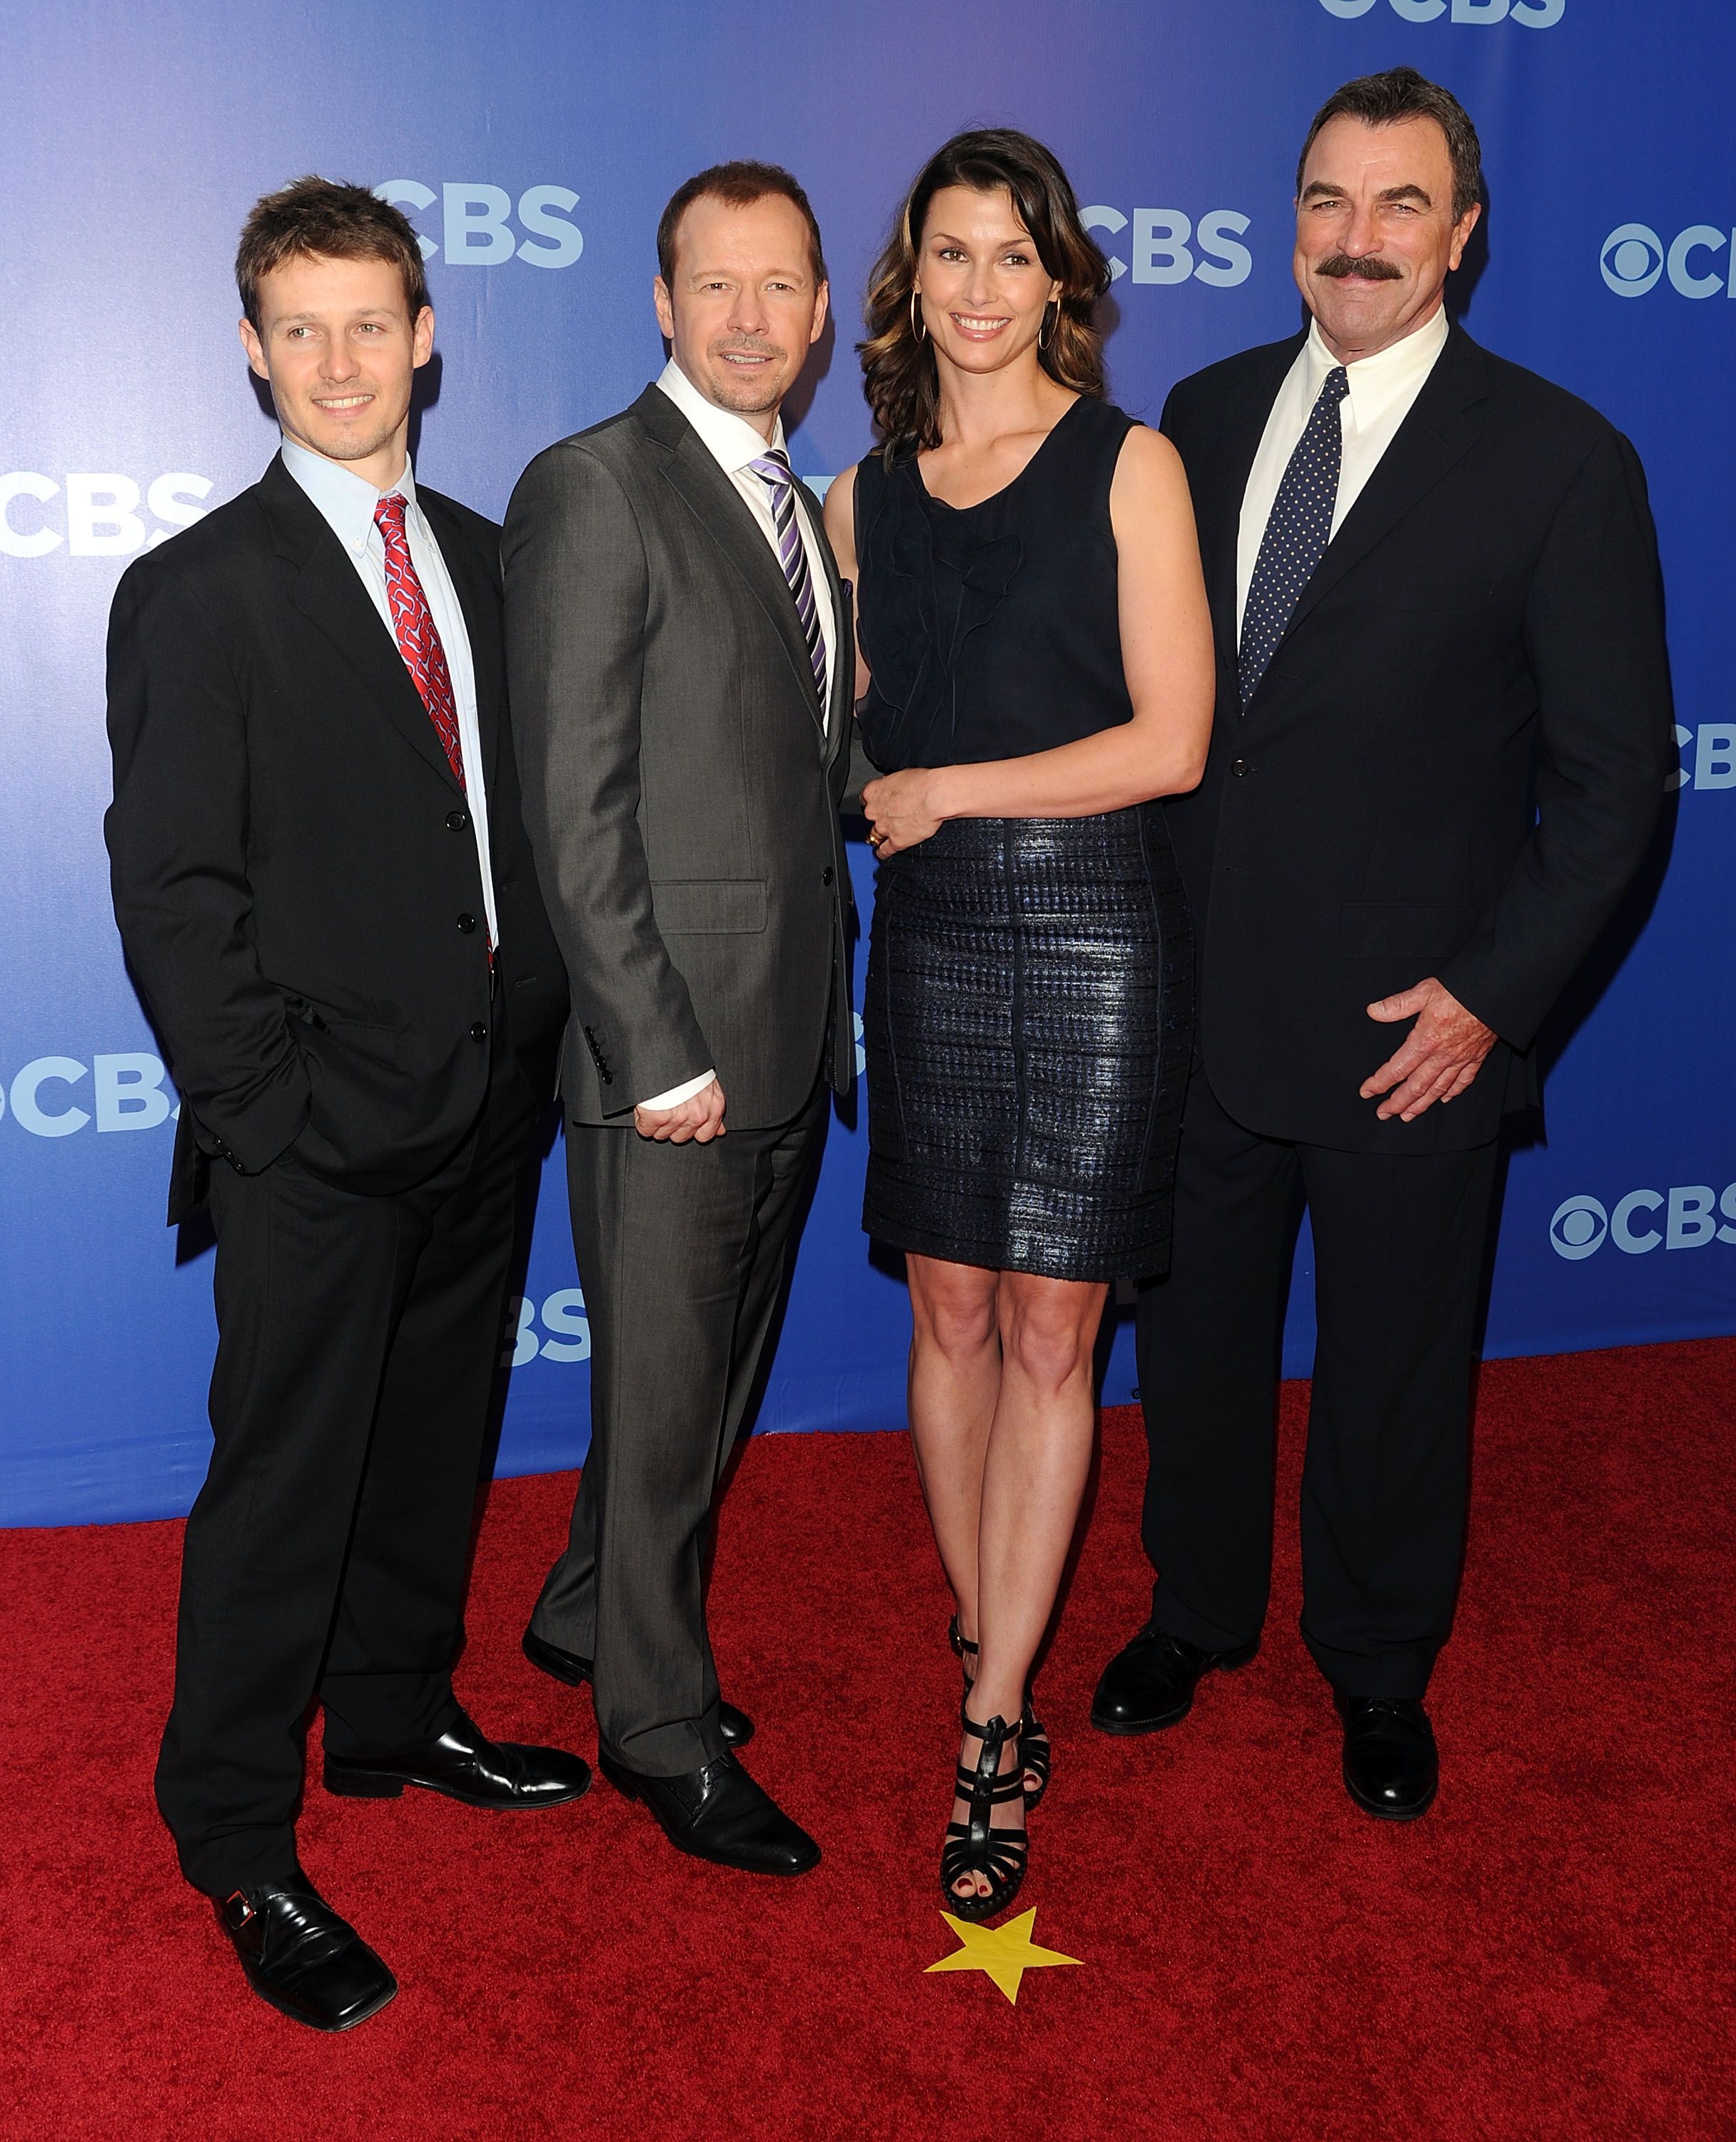 The cast of "Blue Bloods" attend the 2010 CBS UpFront at Damrosch Park, Lincoln Center on May 19, 2010 in New York City | Photo: Getty Images 